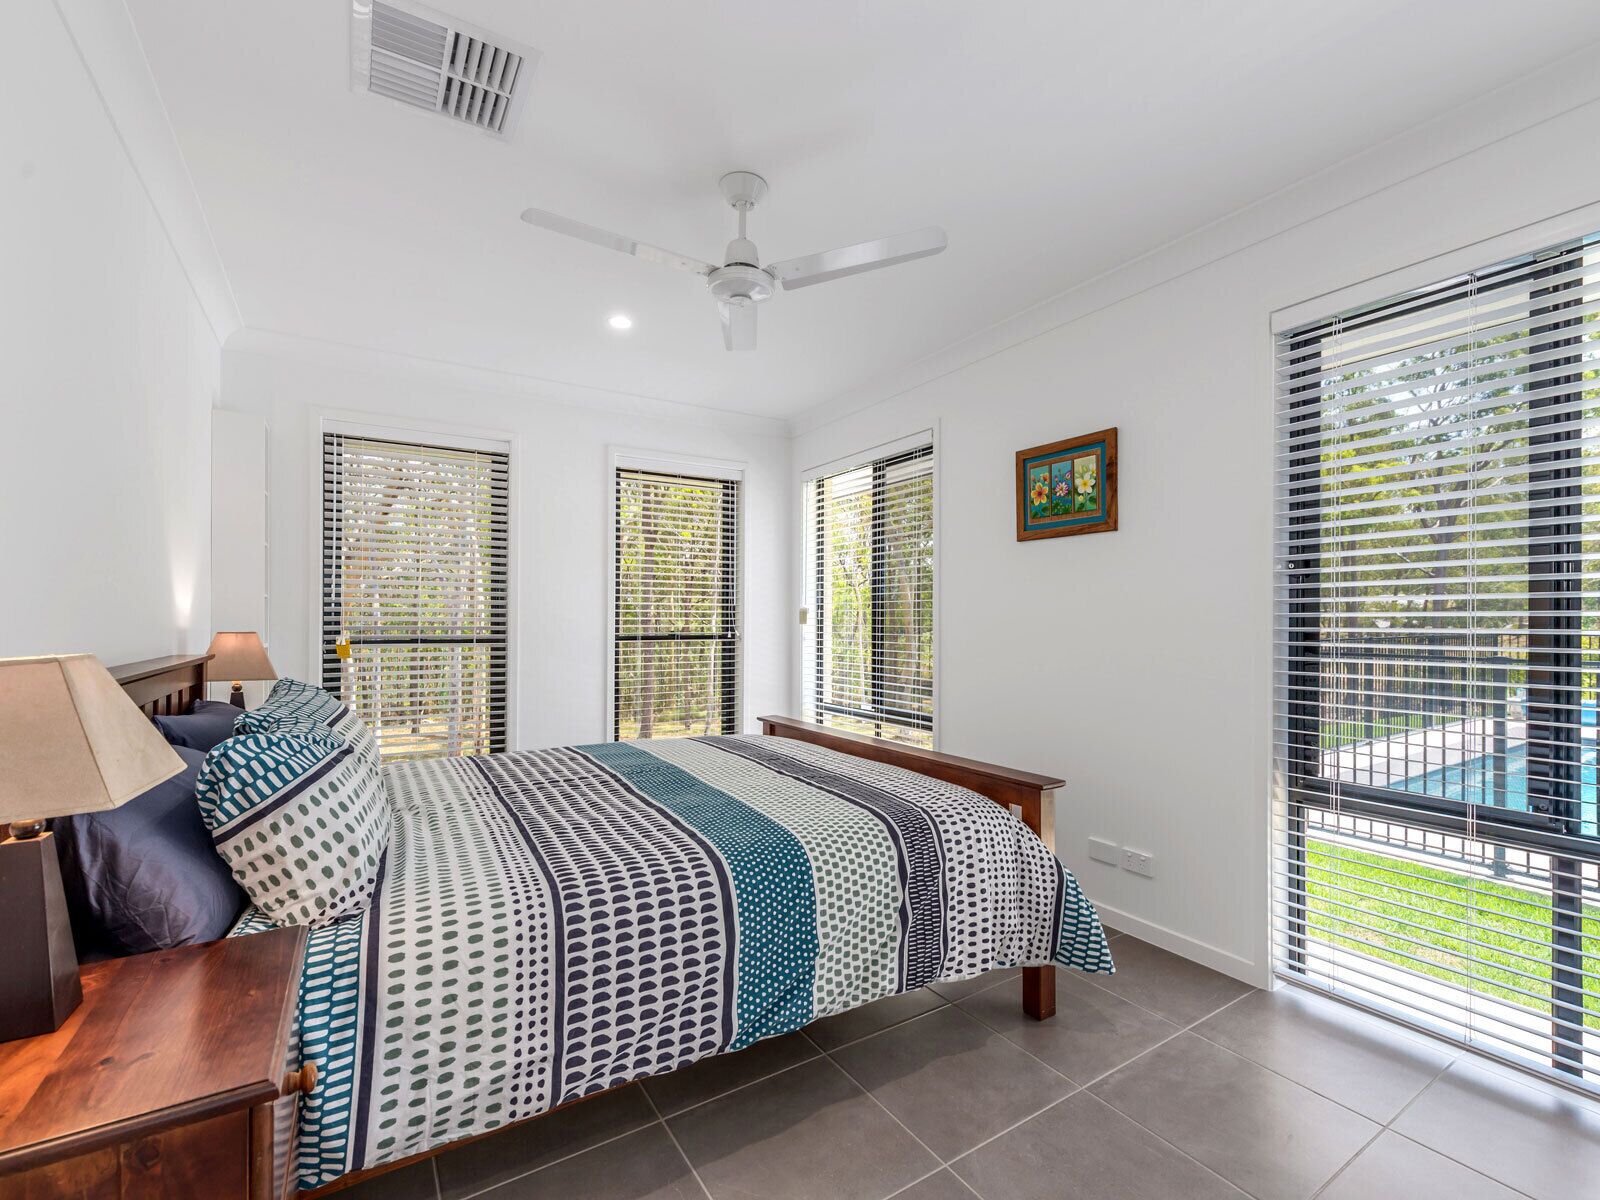 A tranquil bushland retreat with KB, Ducted AC and access to a heated pool.